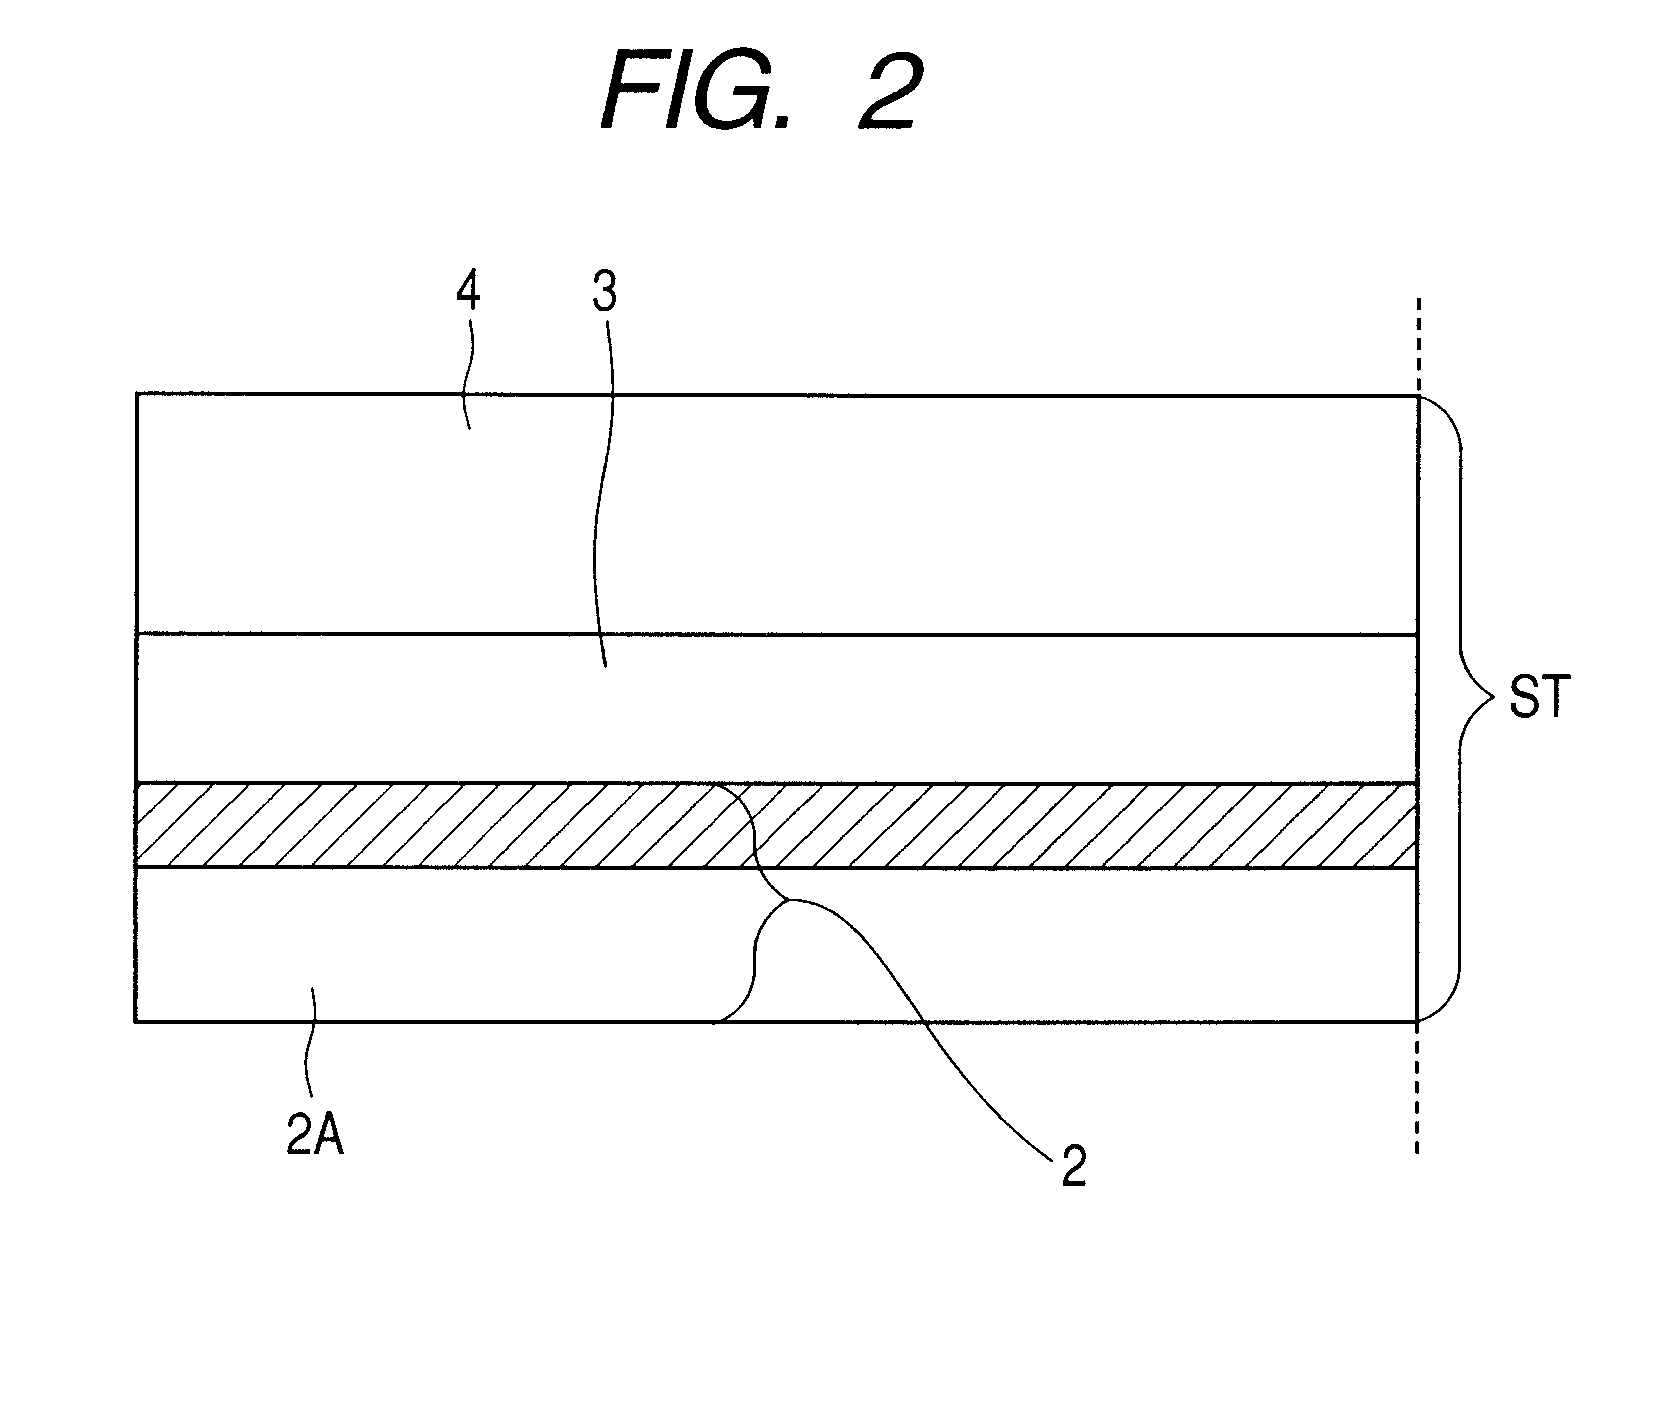 CIS based thin-film photovoltaic module and process for producing the same